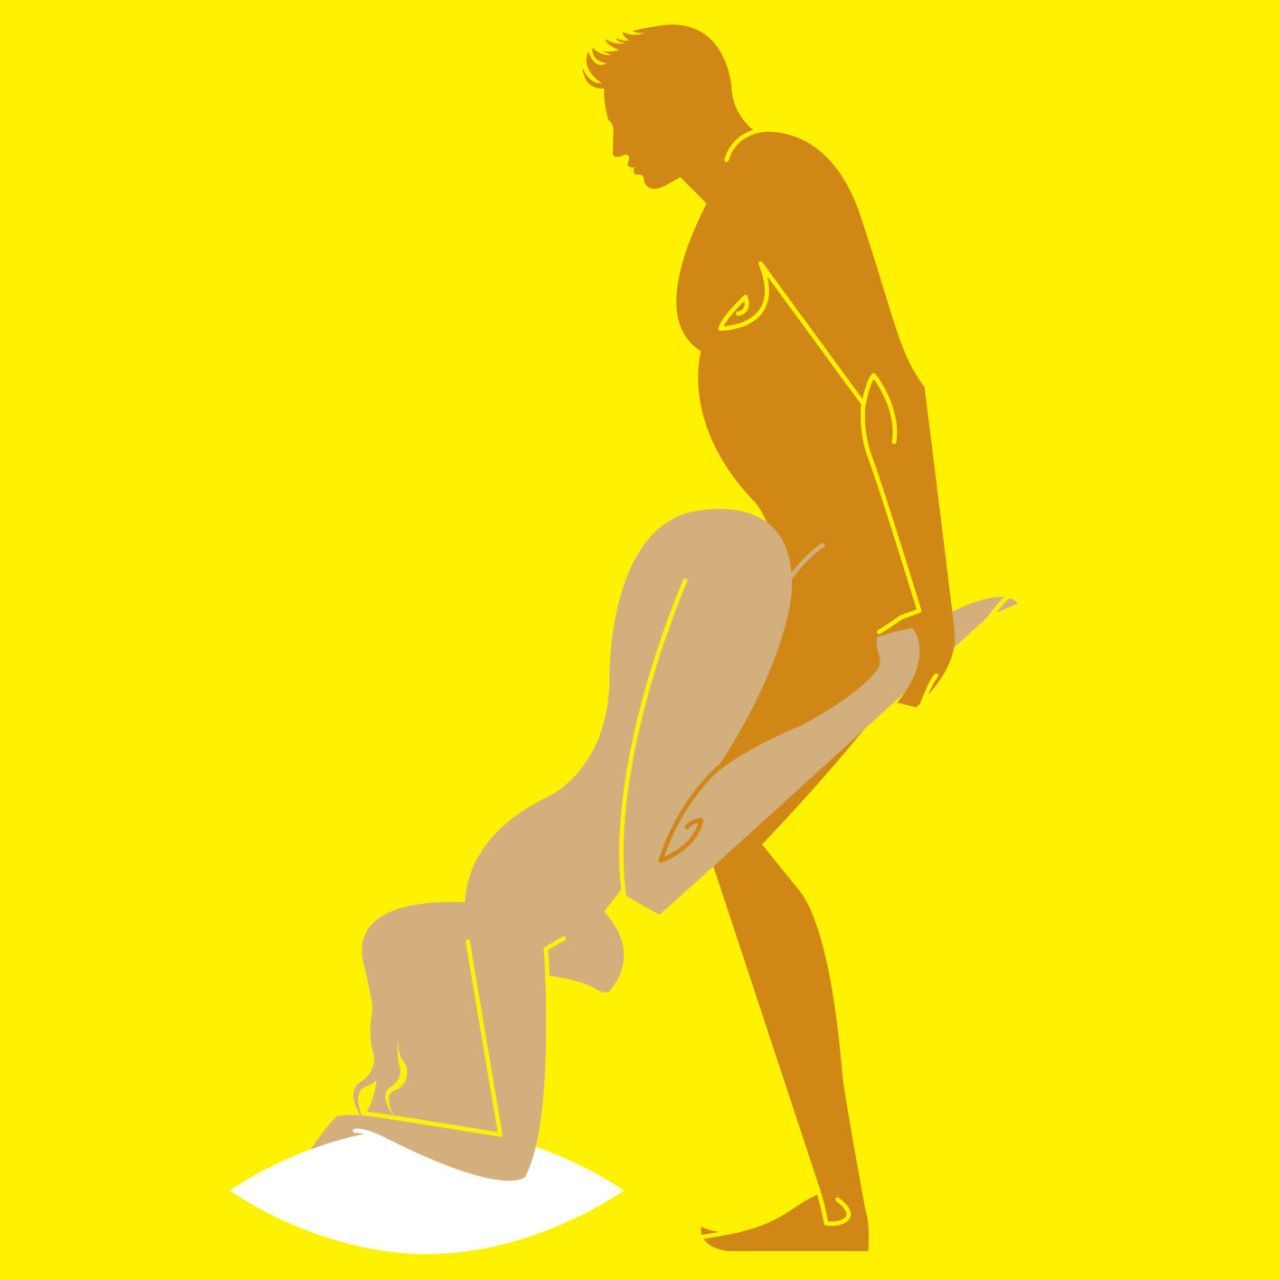 Impossible sexual position illustrations